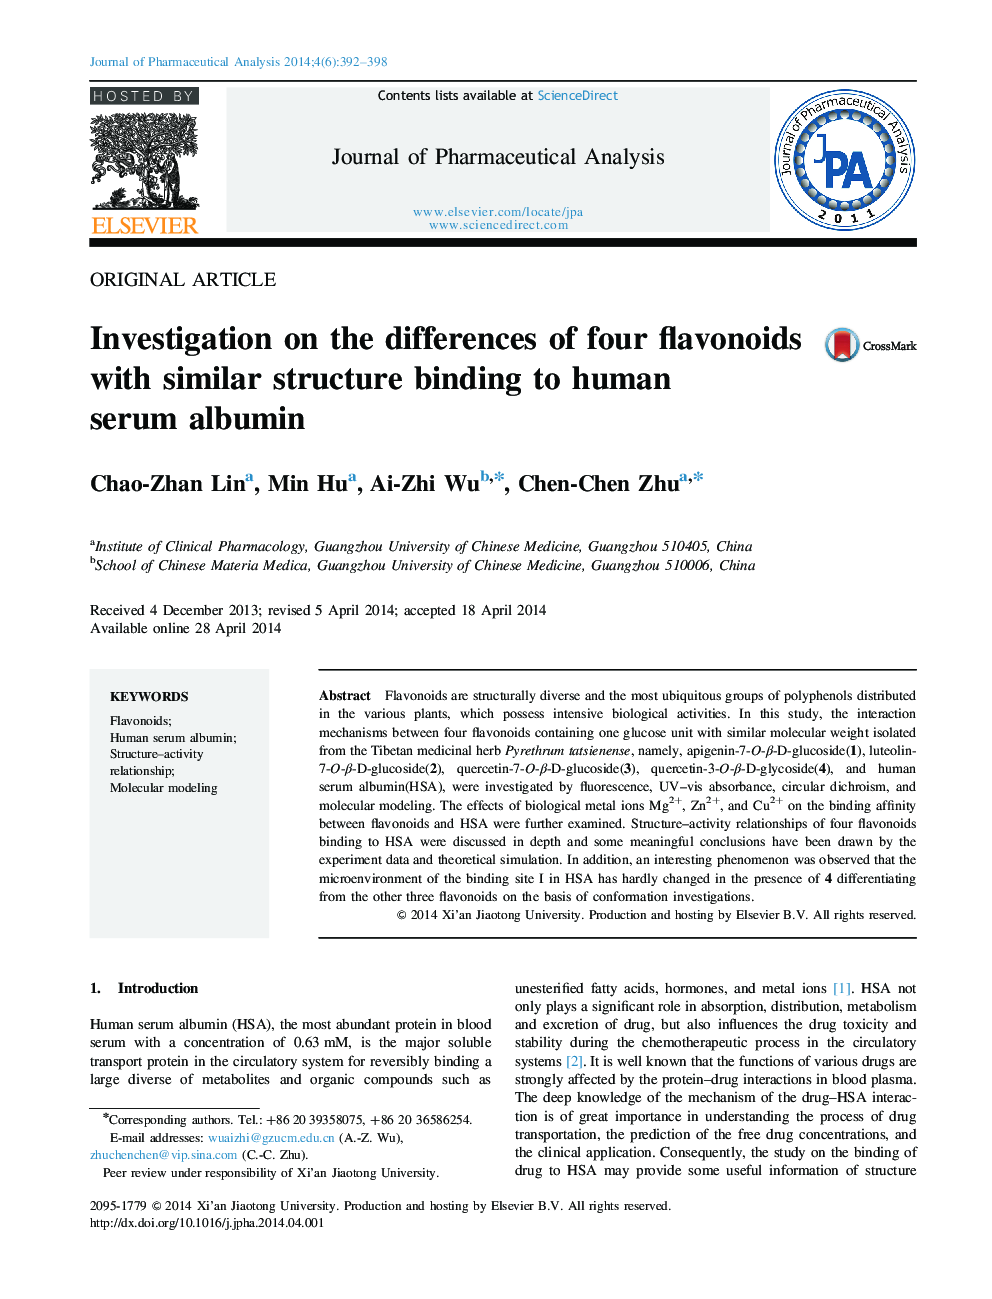 Investigation on the differences of four flavonoids with similar structure binding to human serum albumin 